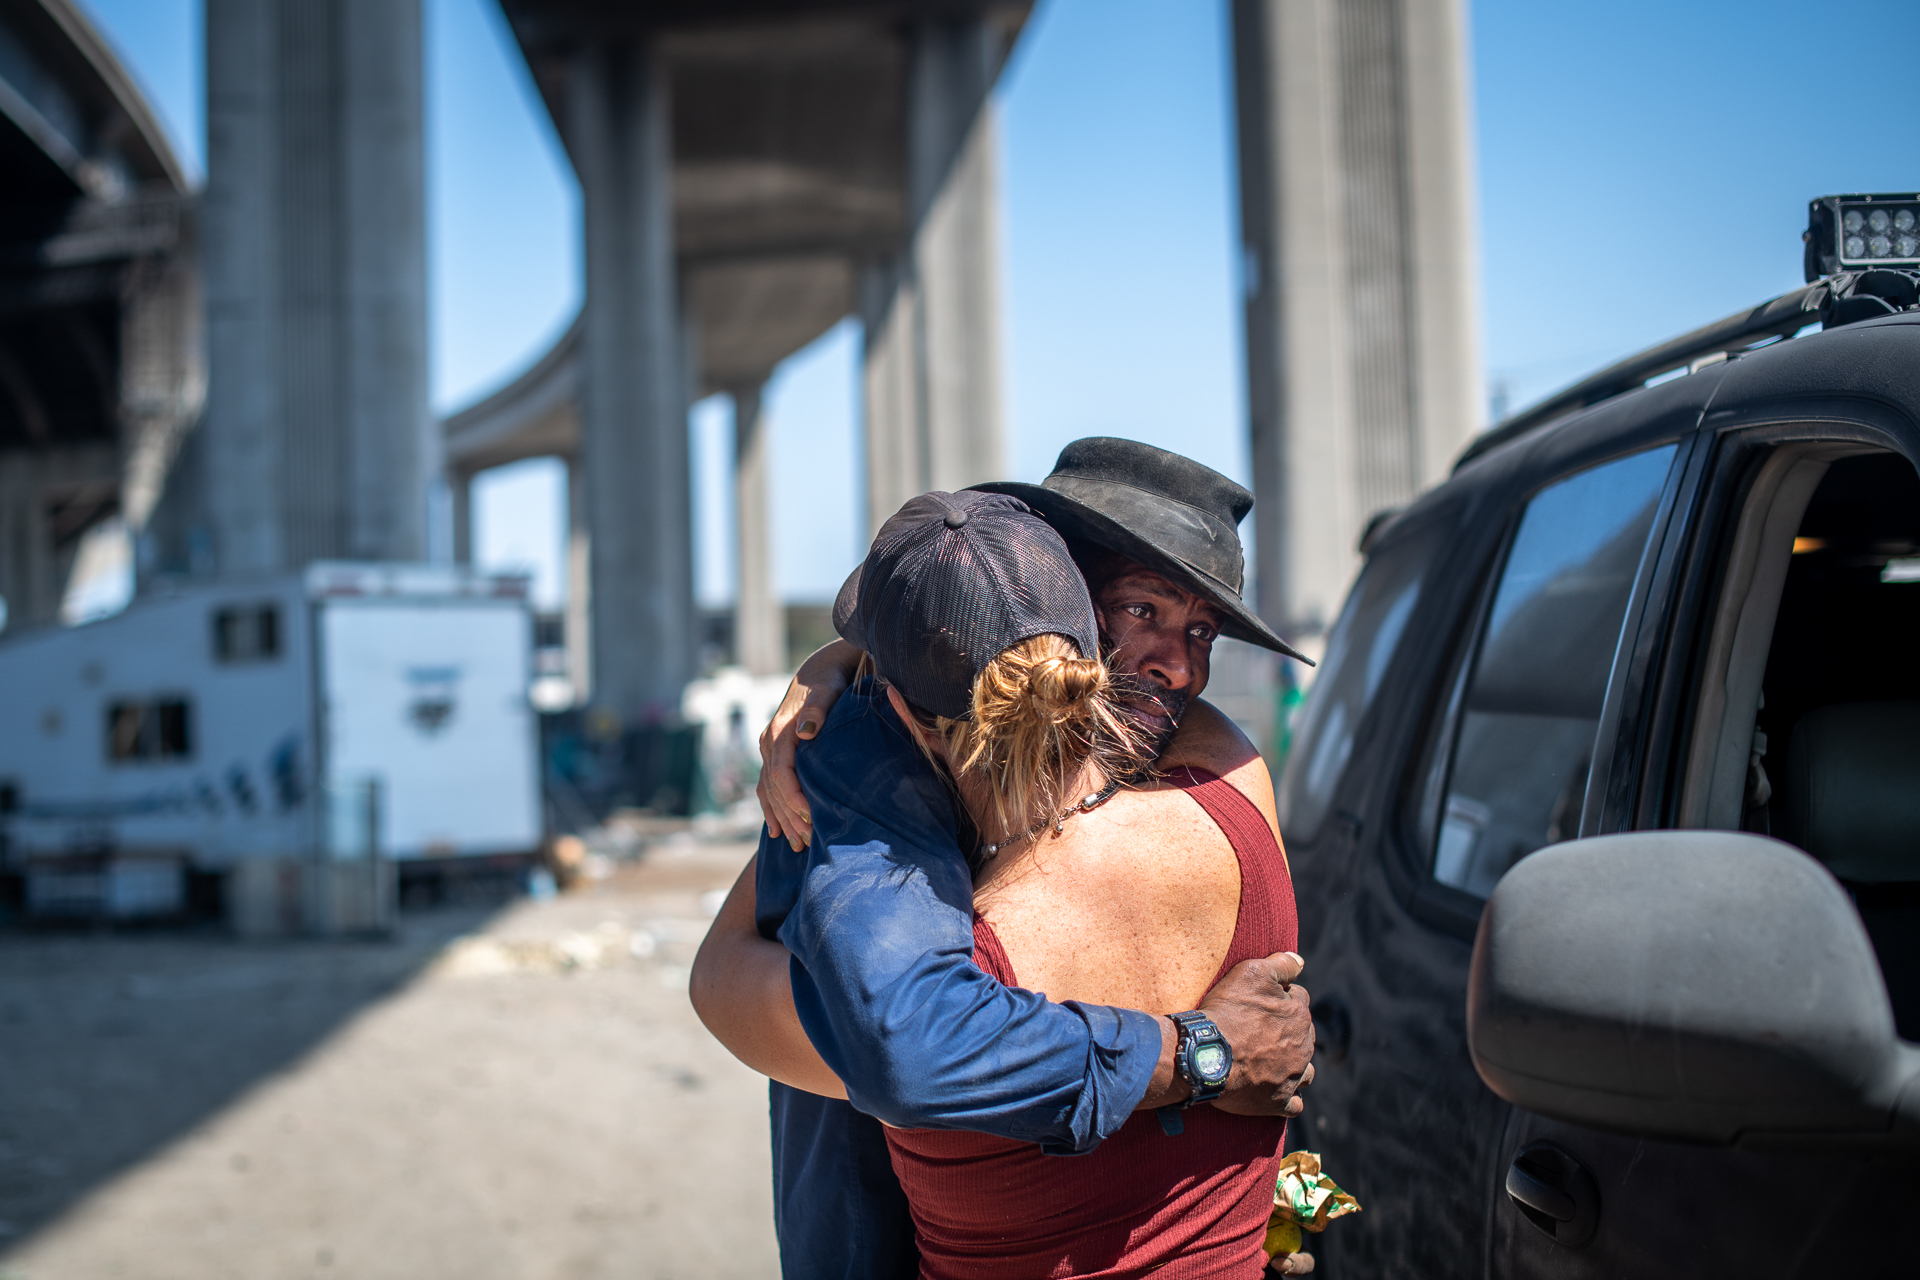 A Black man is photographed hugging another person, with his face visible over their shoulder. He is wearing a black wide-brimmed hat and blue shirt, and his friend (whose face we can't see) is wearing a red vest and a black baseball cap. They are photographed under a freeway overpass.